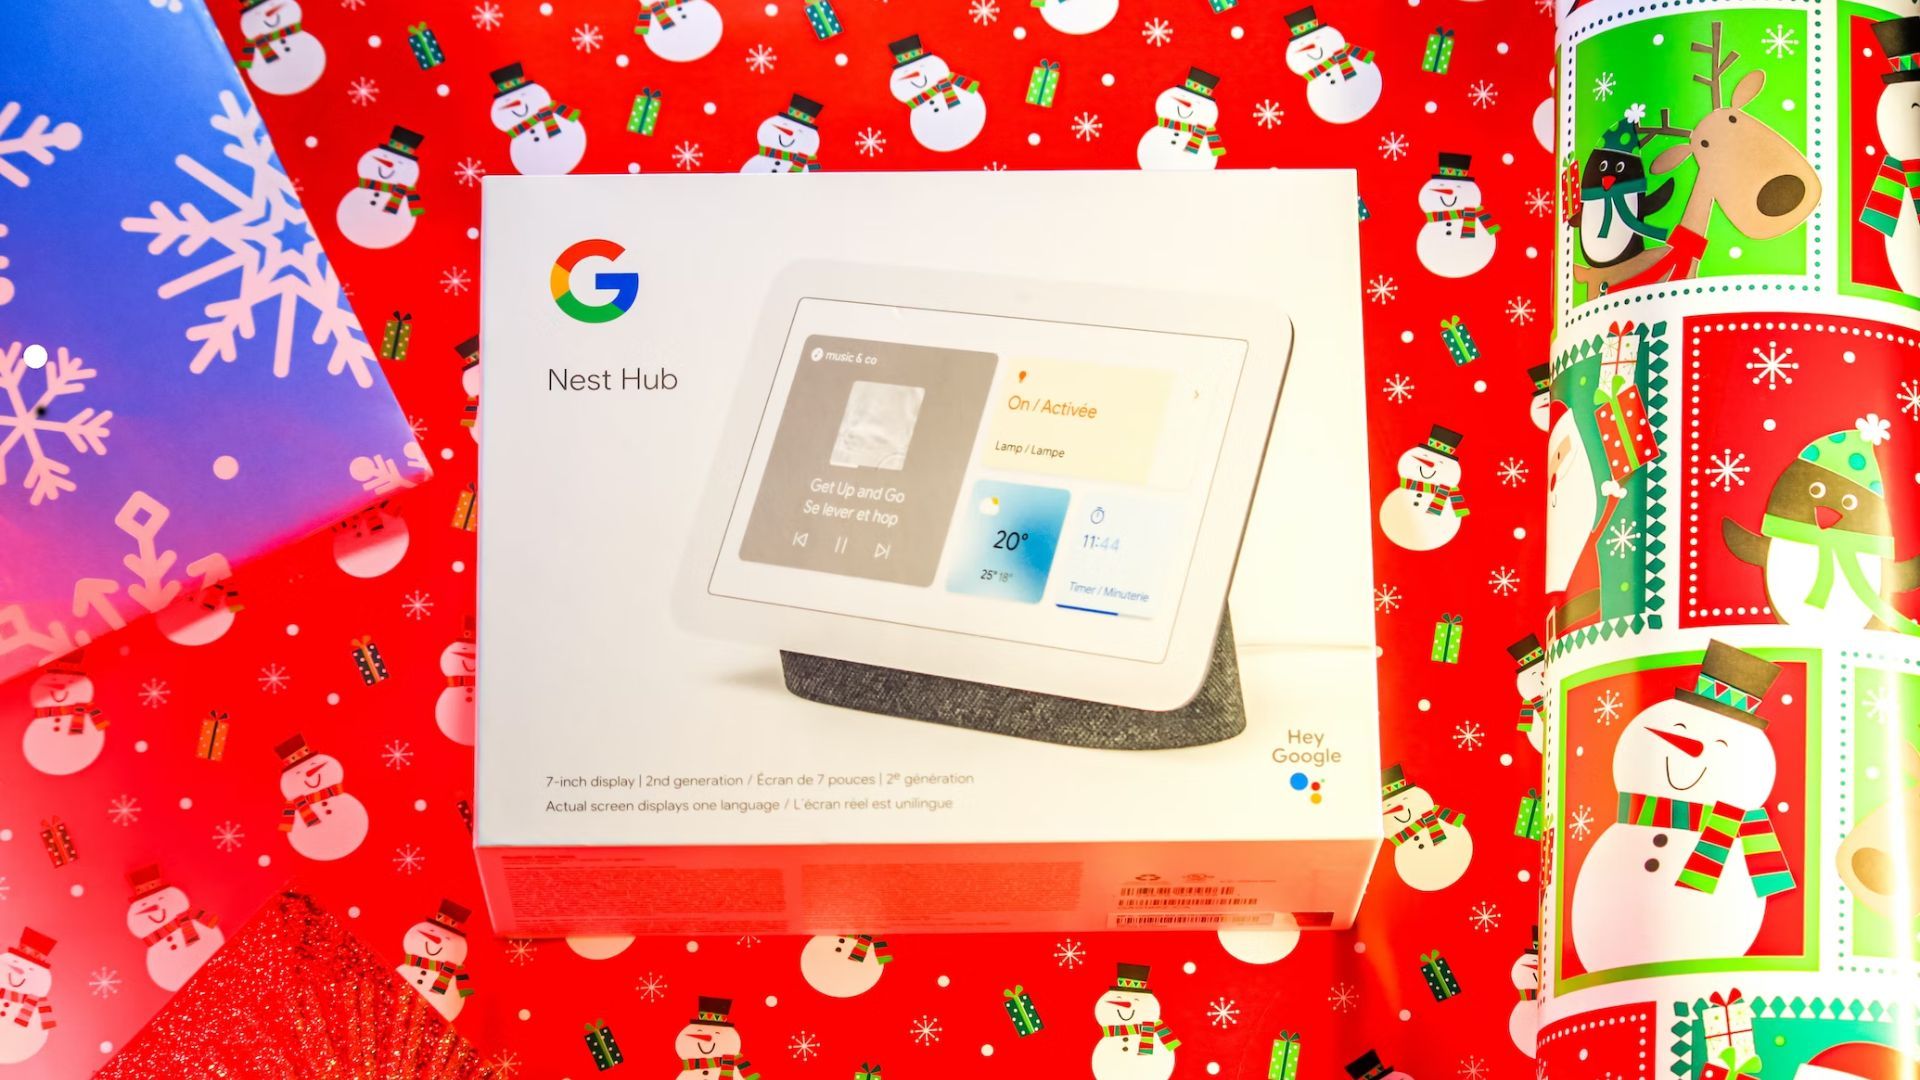 google nest hub in a box on top of holiday wrapping paper